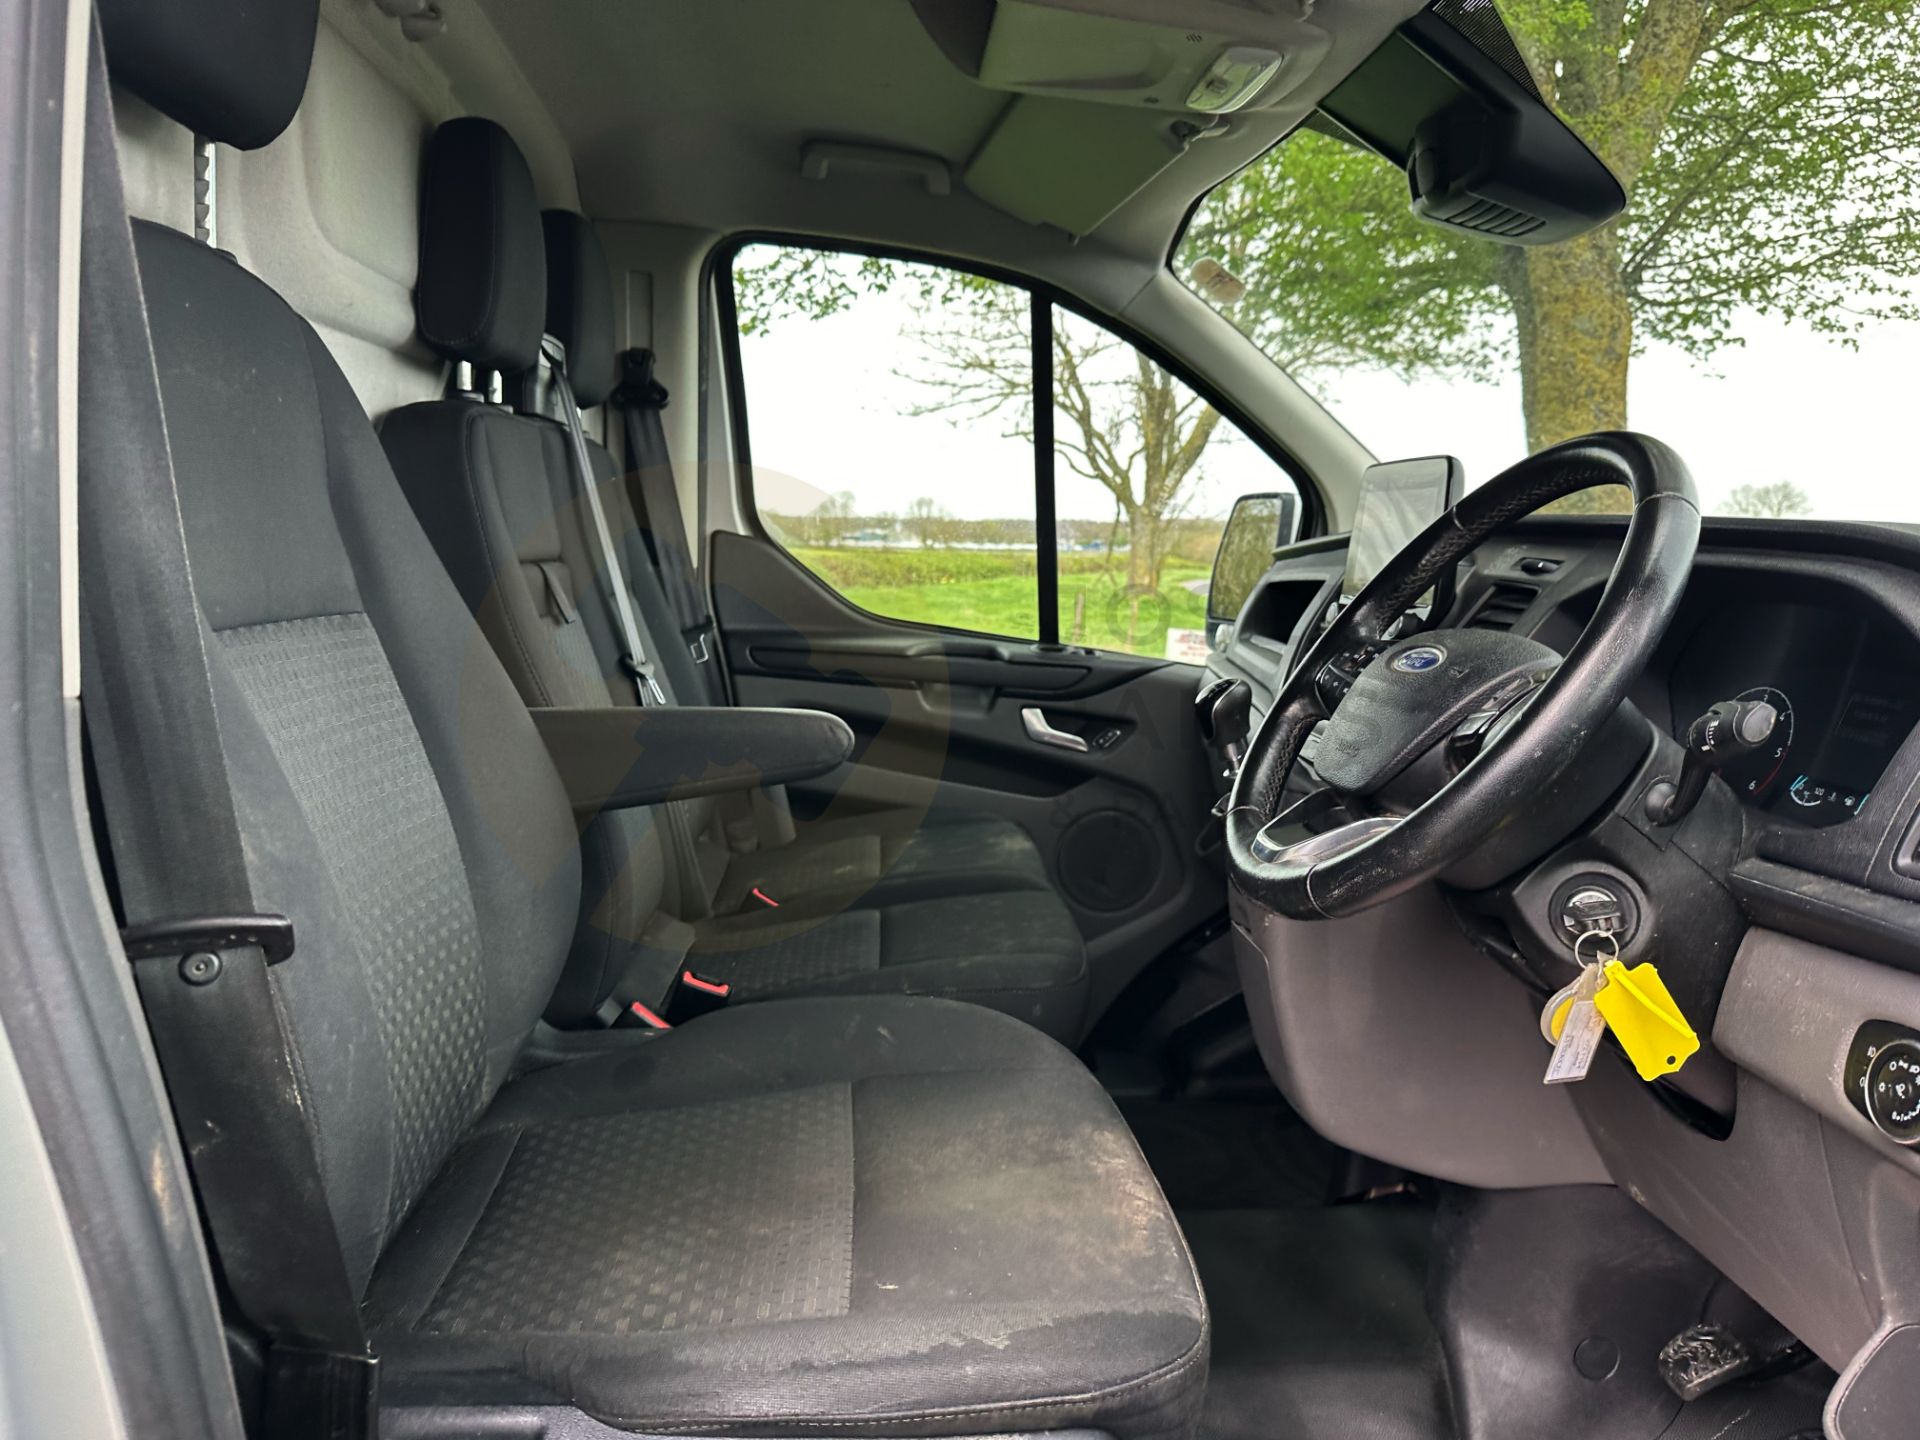 FORD TRANSIT CUSTOM "TREND" 2.0TDCI (130) 20 REG -1 OWNER- SILVER -GREAT SPEC -LOW MILEAGE - Image 26 of 38